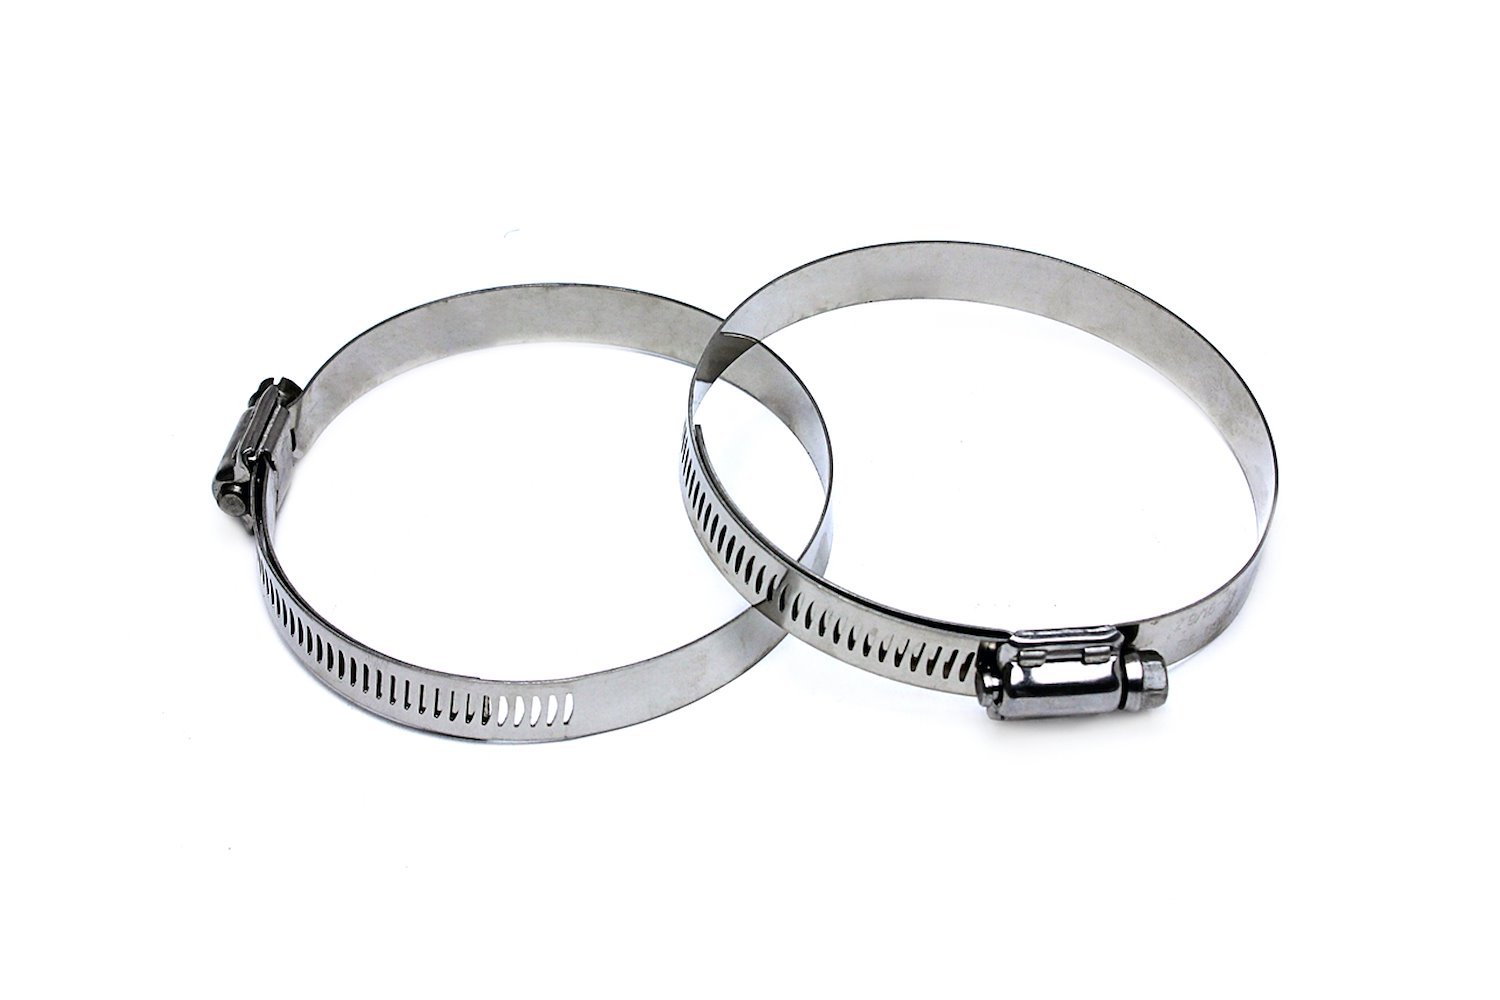 SSWC-78-102x2 Stainless Steel Worm Gear Hose Clamp, Effective Range: 3-1/16 in.- 4 in., 2Pc